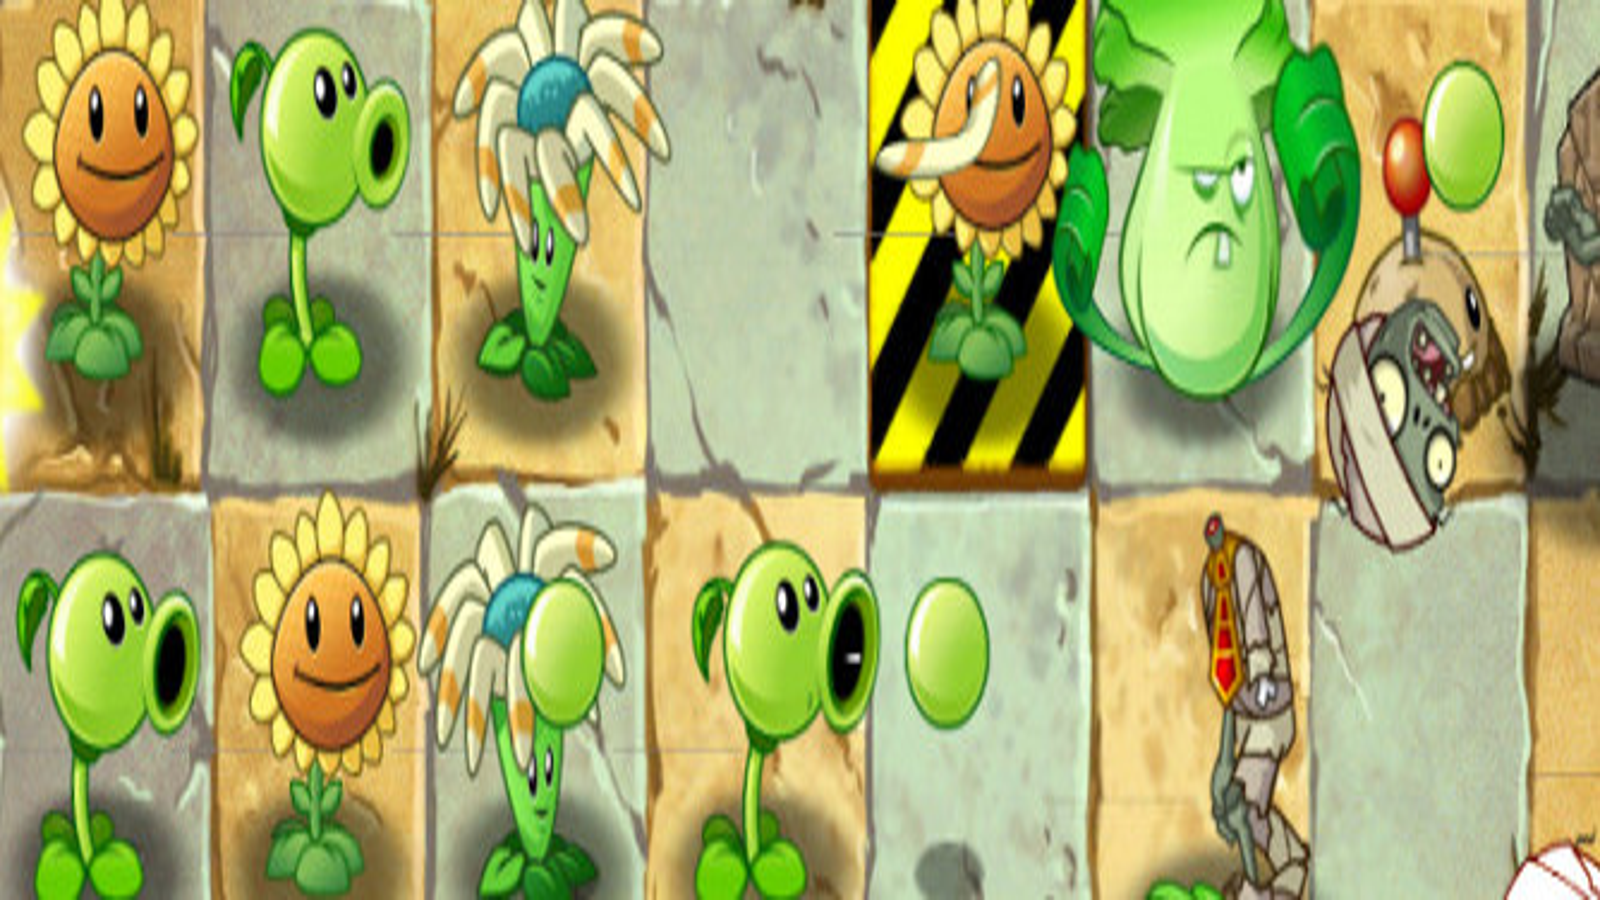 Plants vs Zombies™ 2 - Apps on Google Play